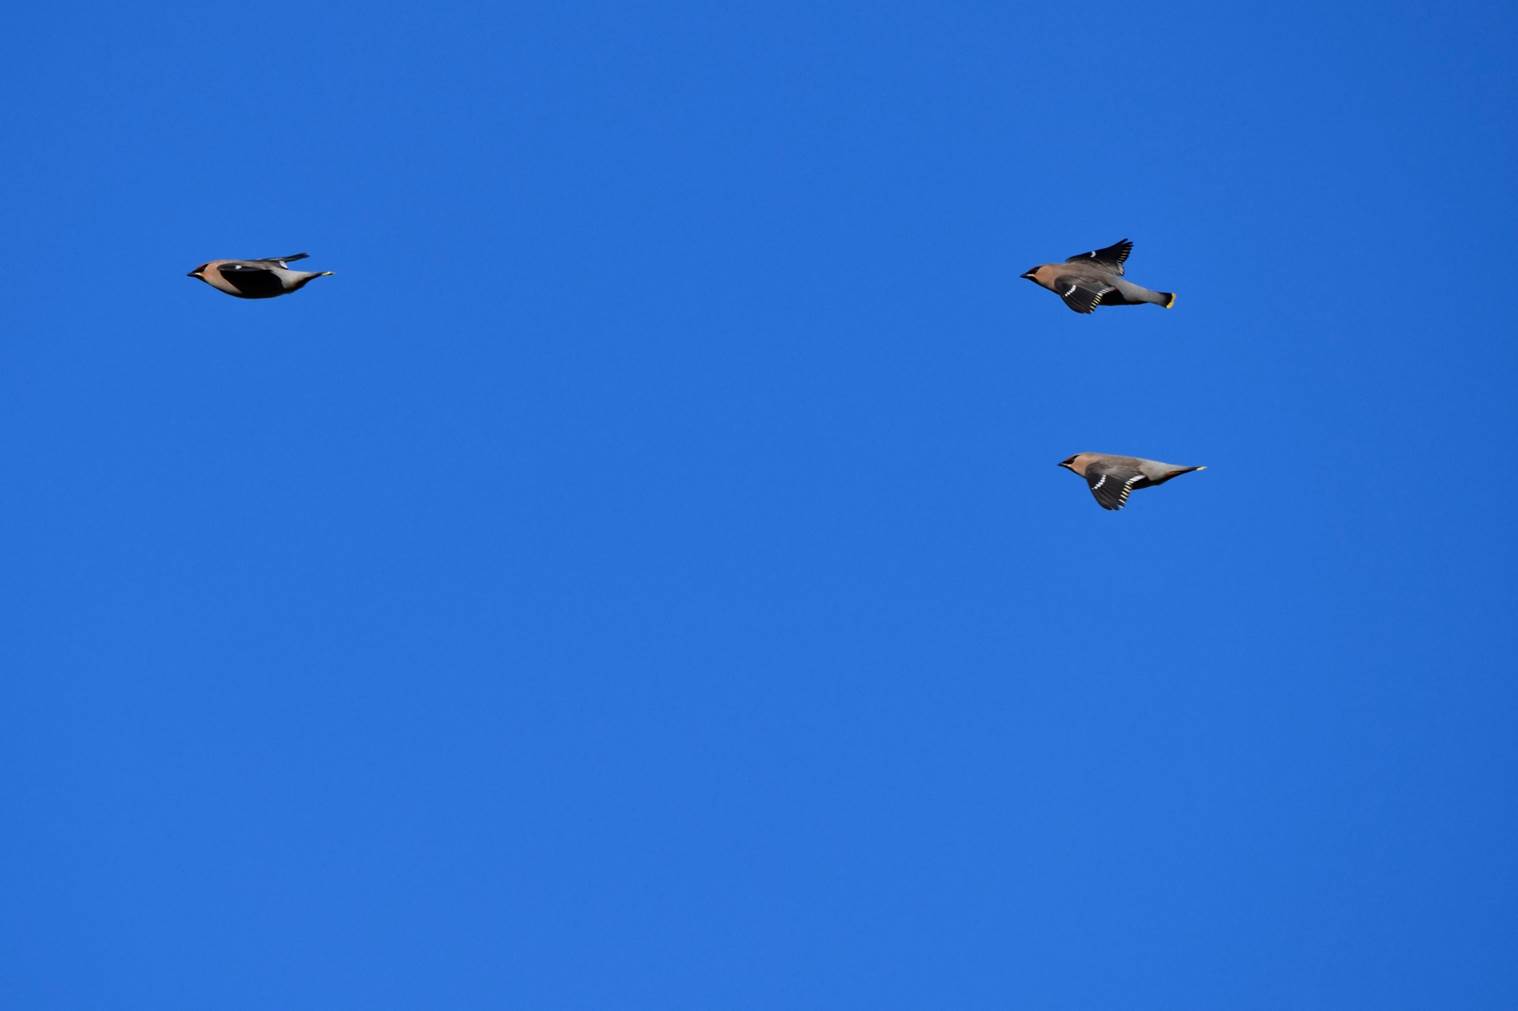 A group of birds flying in the sky

Description automatically generated